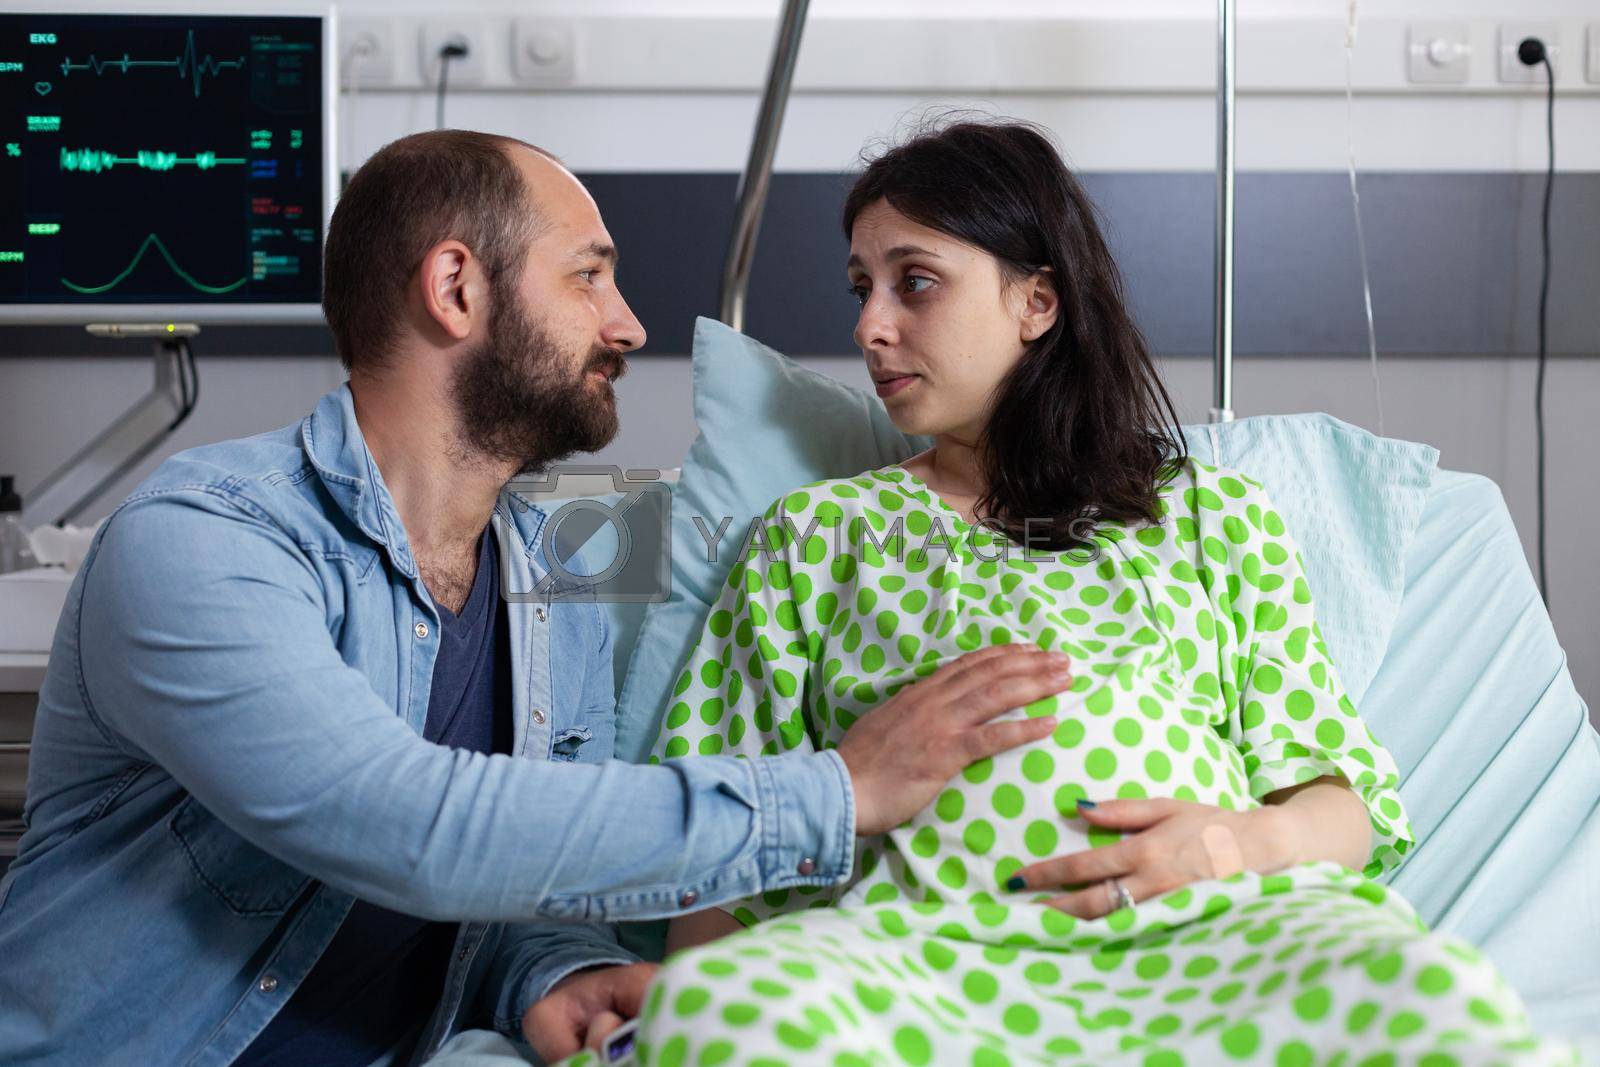 Couple expecting baby at healthcare facility in hospital ward. Father of child holding hand on belly of pregnant woman sitting in bed. Young parents preparing for childbirth and parenthood